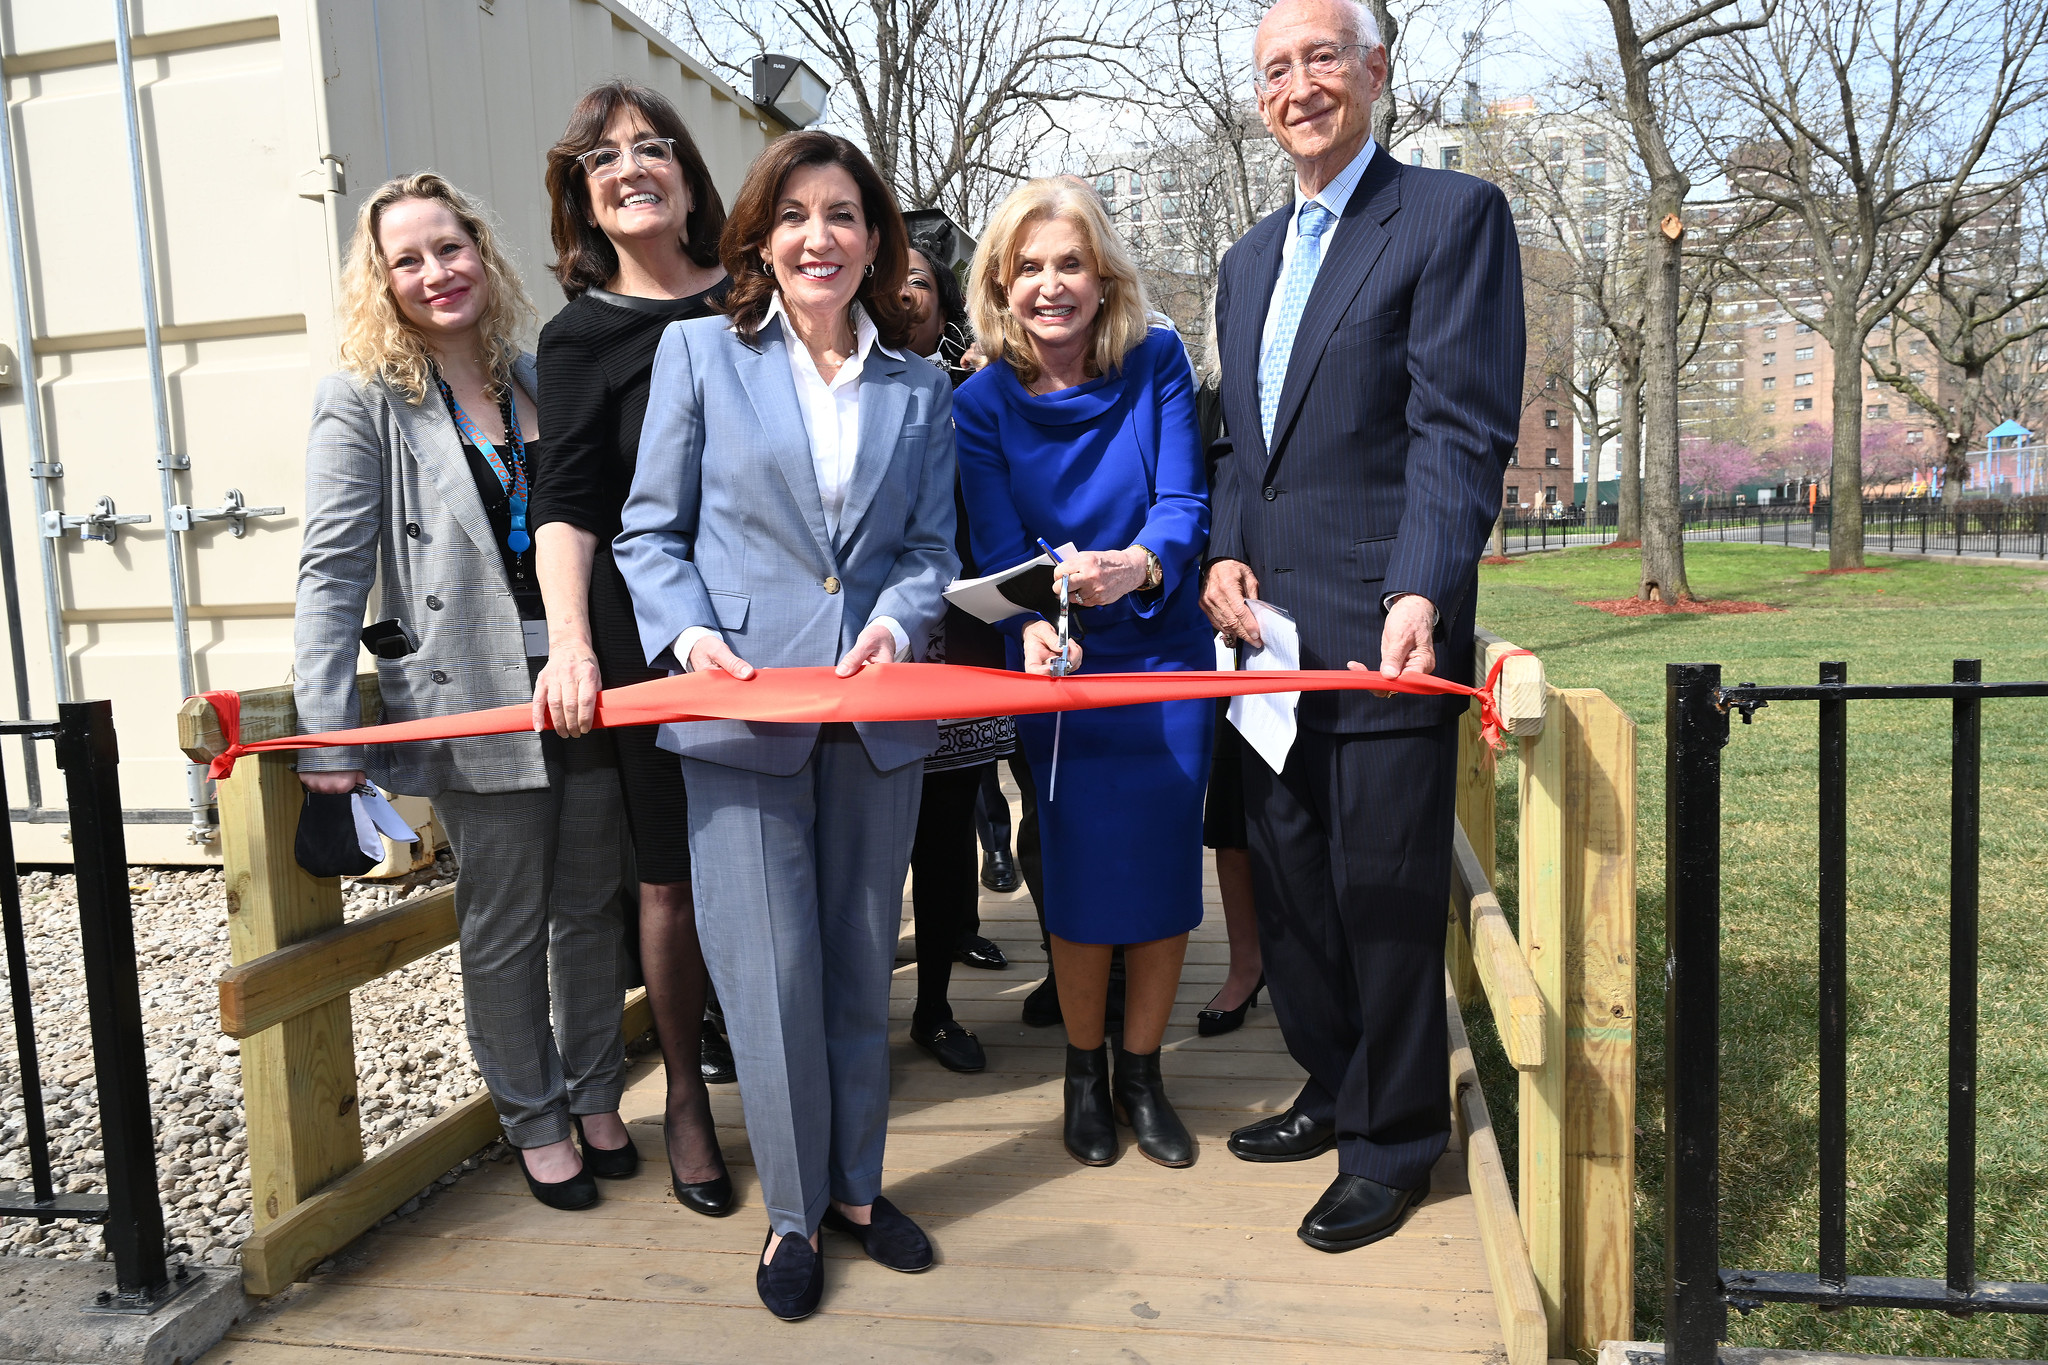 Governor Kathy Hochul [center] at a ribbon cutting ceremony for the new Astoria Houses facility - Courtesy of Kevin P. Coughlin, Office of Governor Kathy Hochul